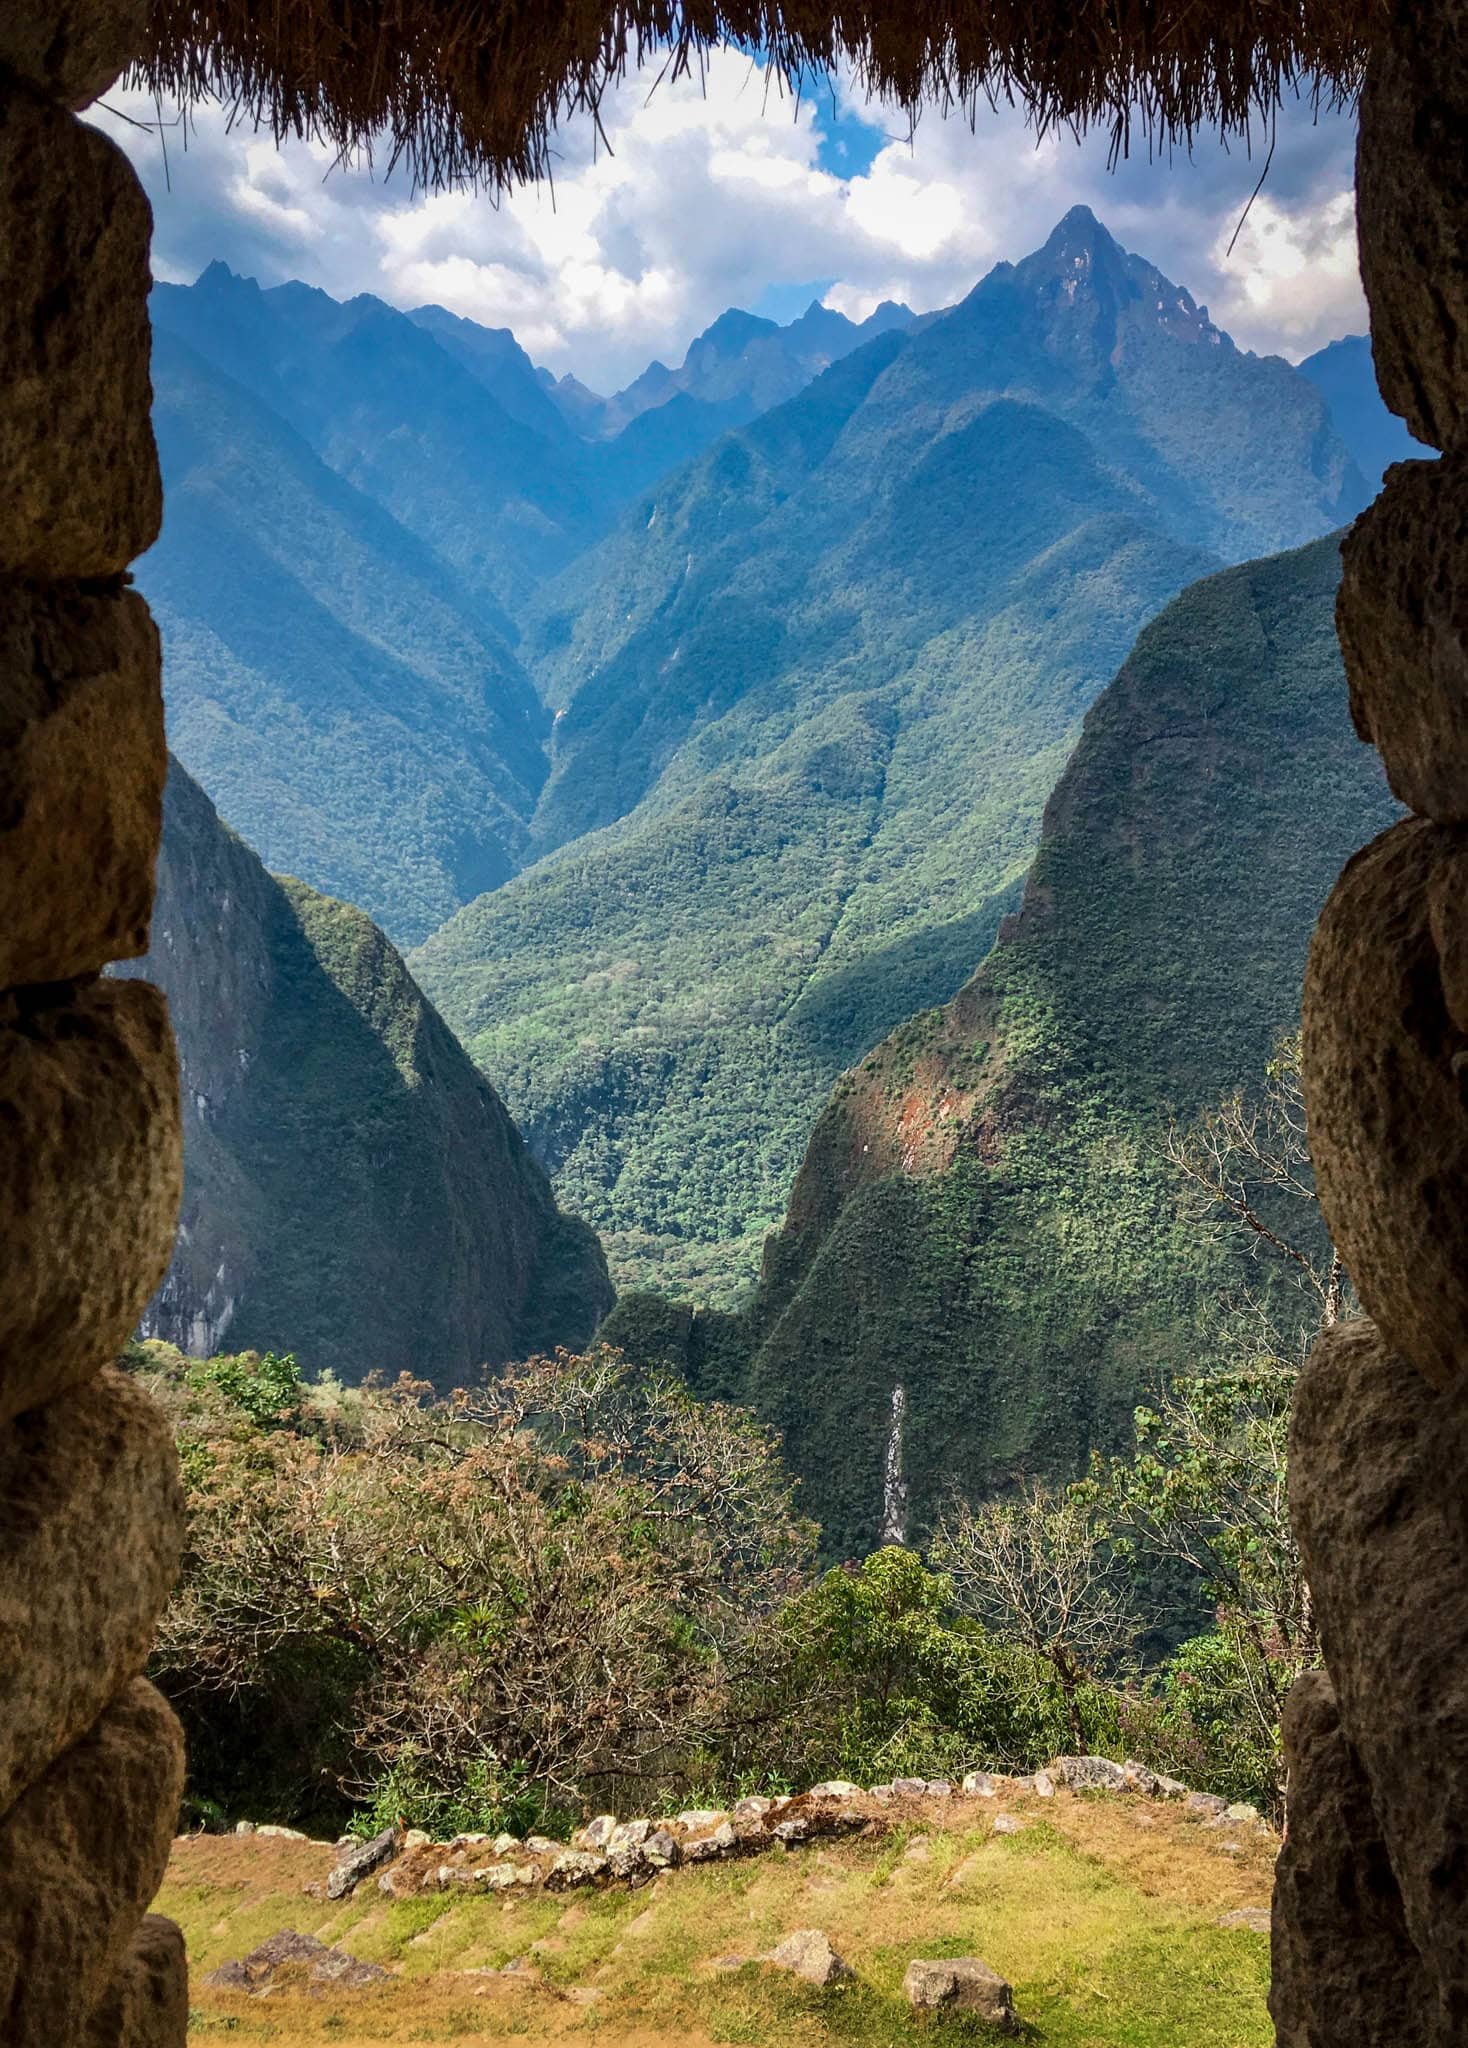 View from an Incan house at Machu Picchu